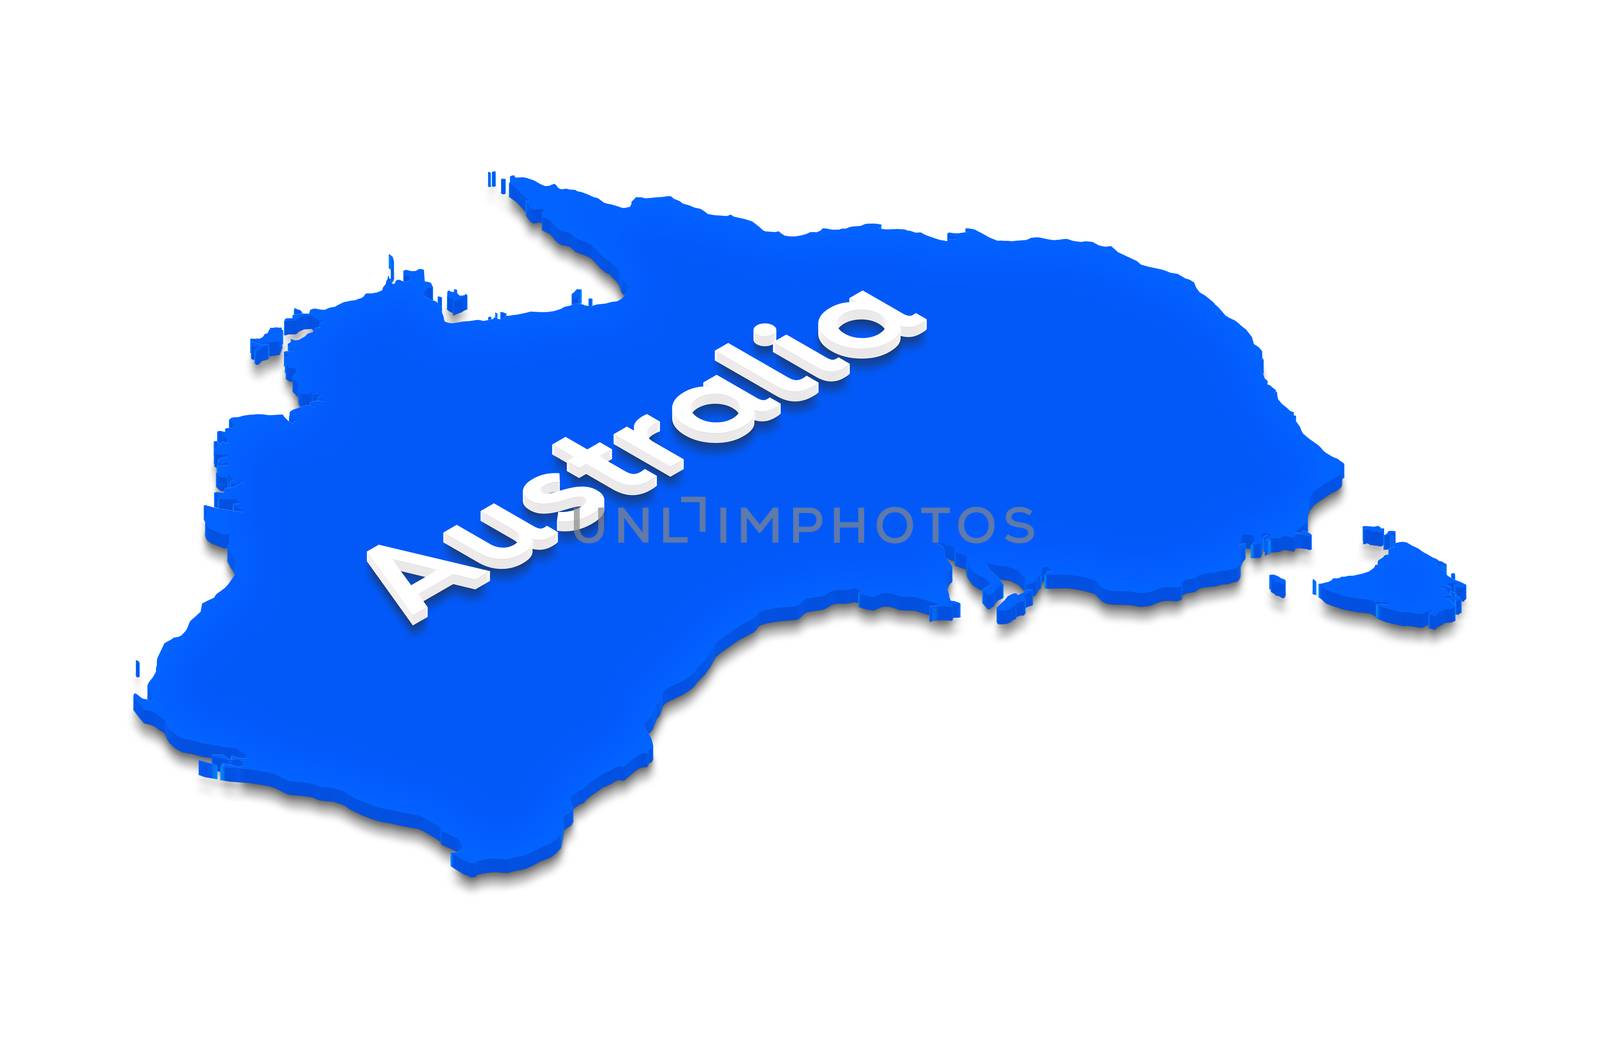 Map of Australia. 3D isometric illustration. by sanches812